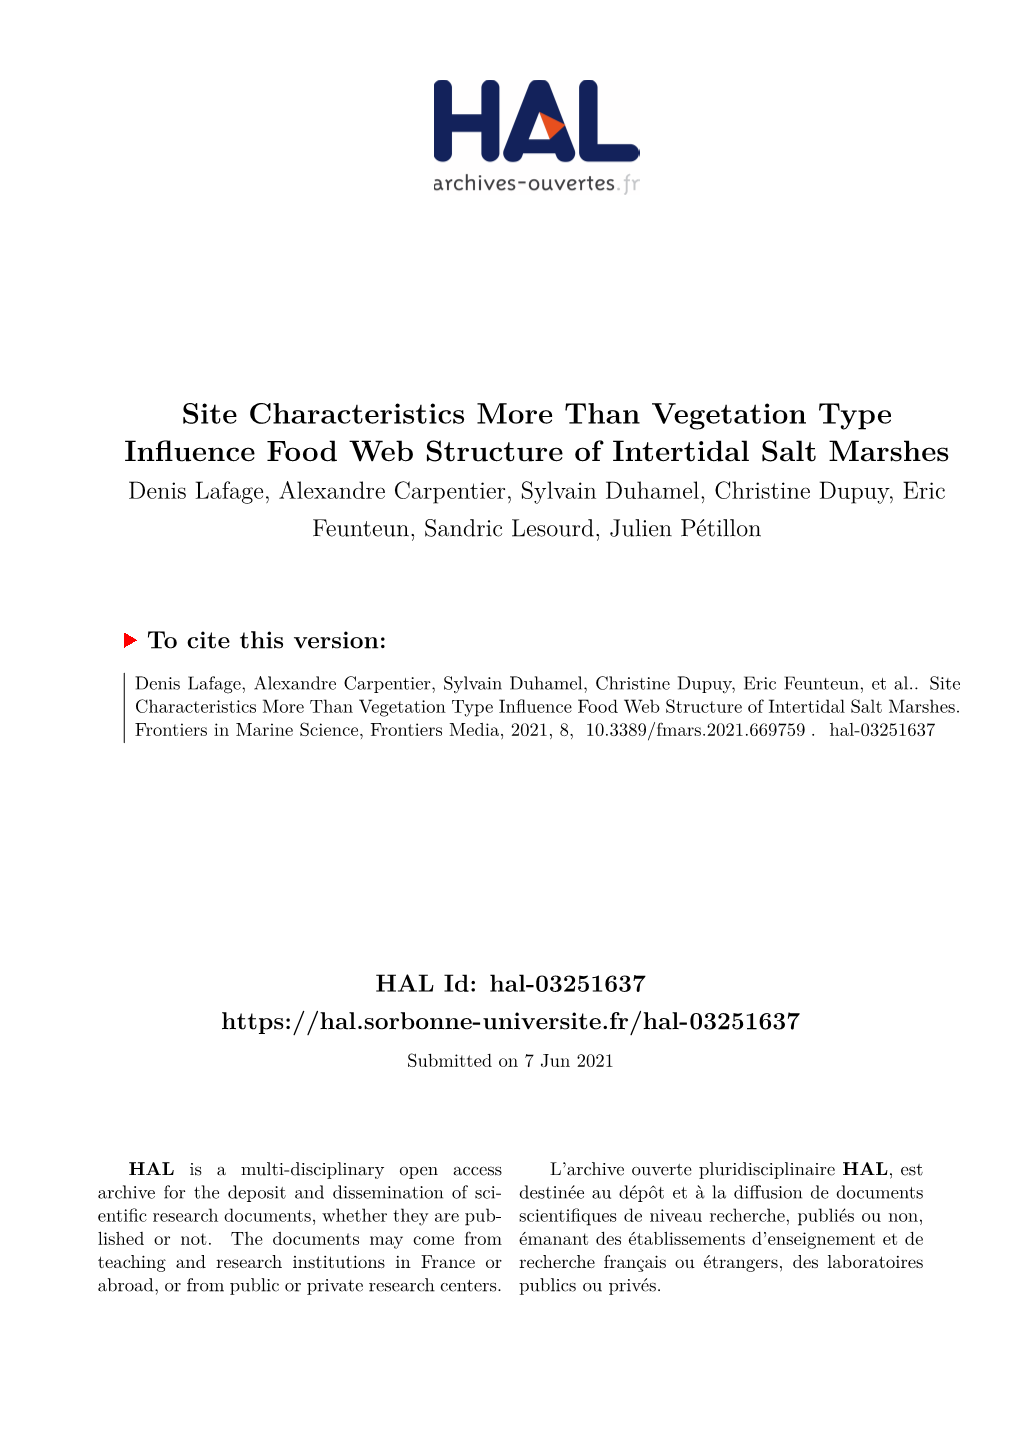 Site Characteristics More Than Vegetation Type Influence Food